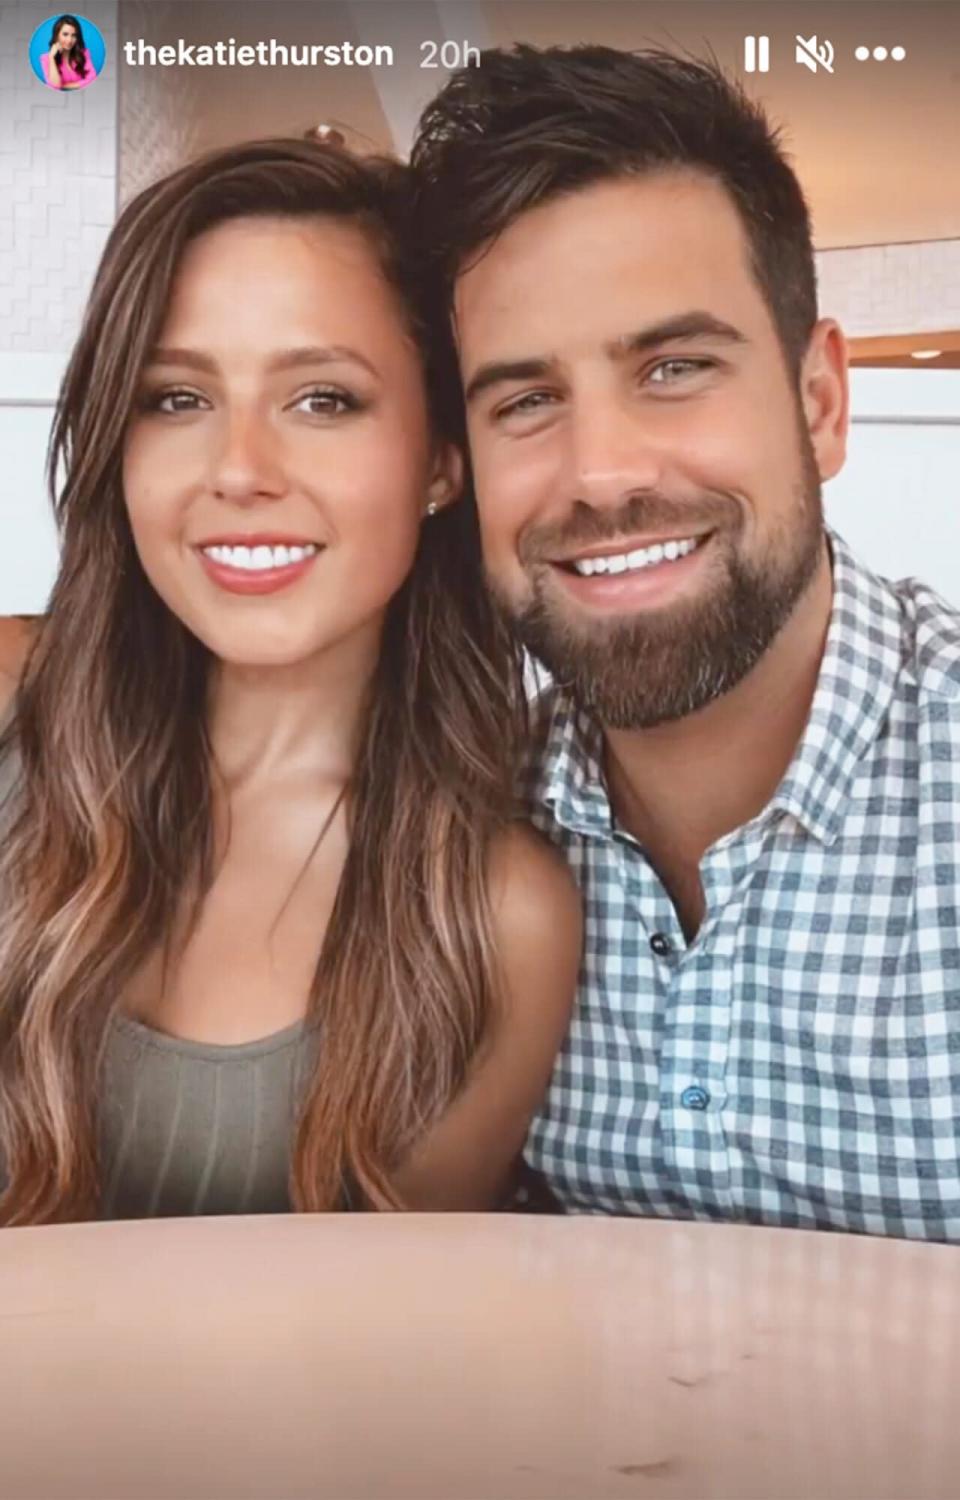 Katie Thurston and Blake Moynes Visit Canada Together Following Engagement On The Bachelorette